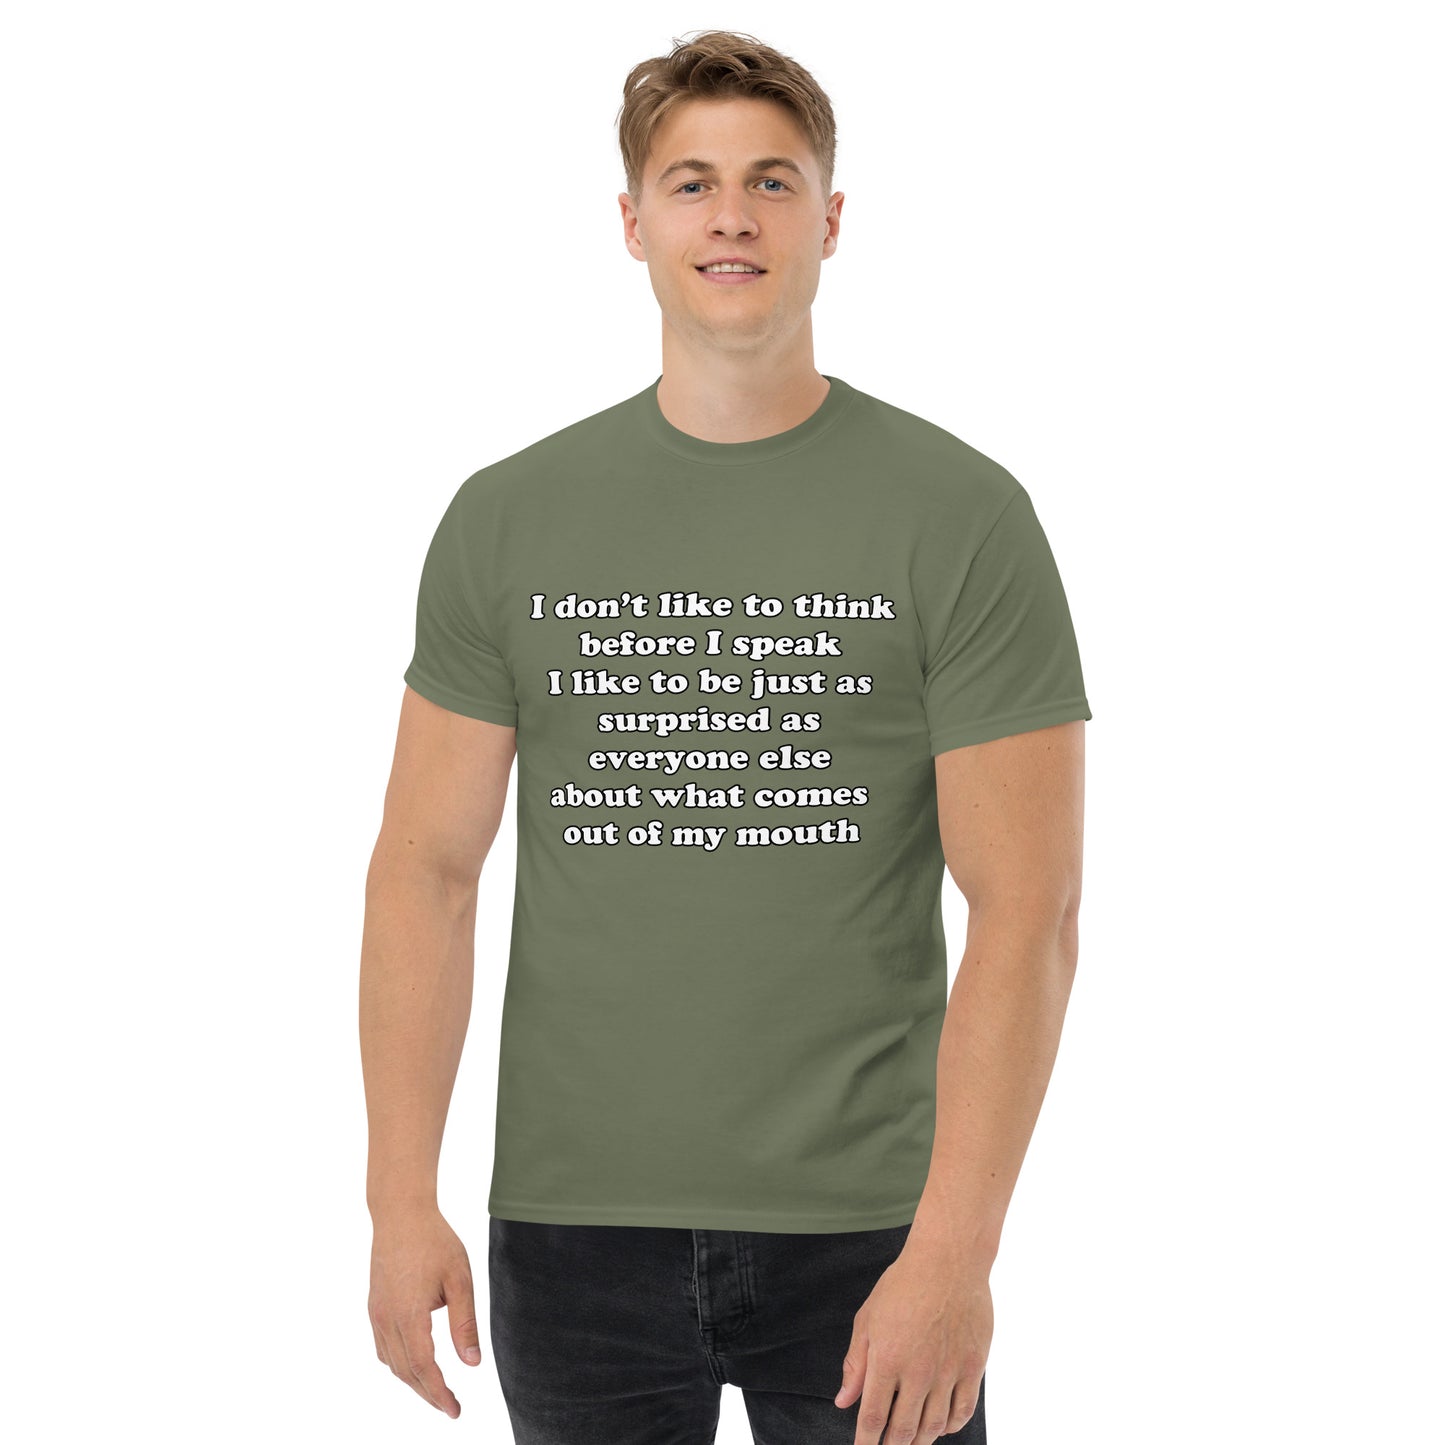 Man with military green t-shirt with text “I don't think before I speak Just as serprised as everyone about what comes out of my mouth"